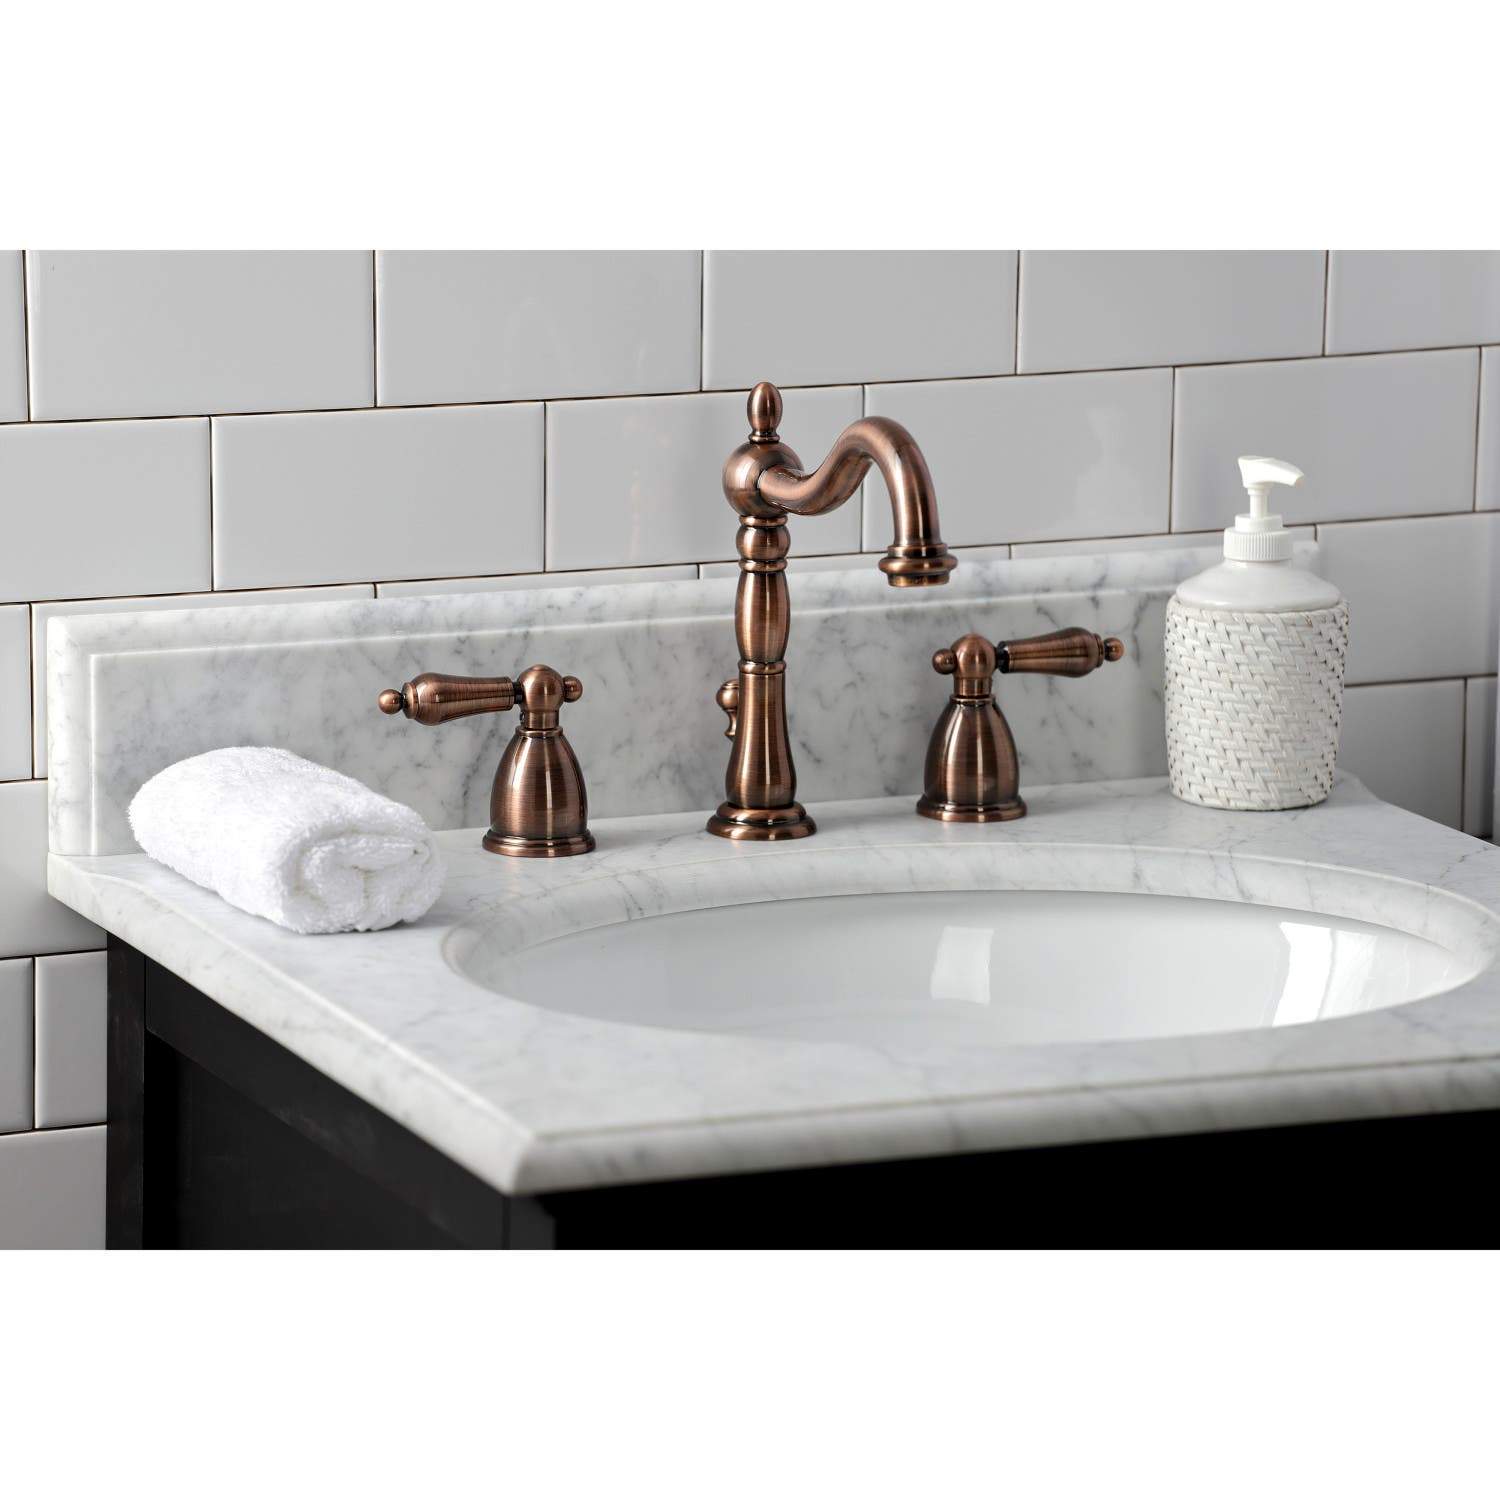 Kingston Brass KB197ALAC 8 in. Widespread Bathroom Faucet, Antique Copper